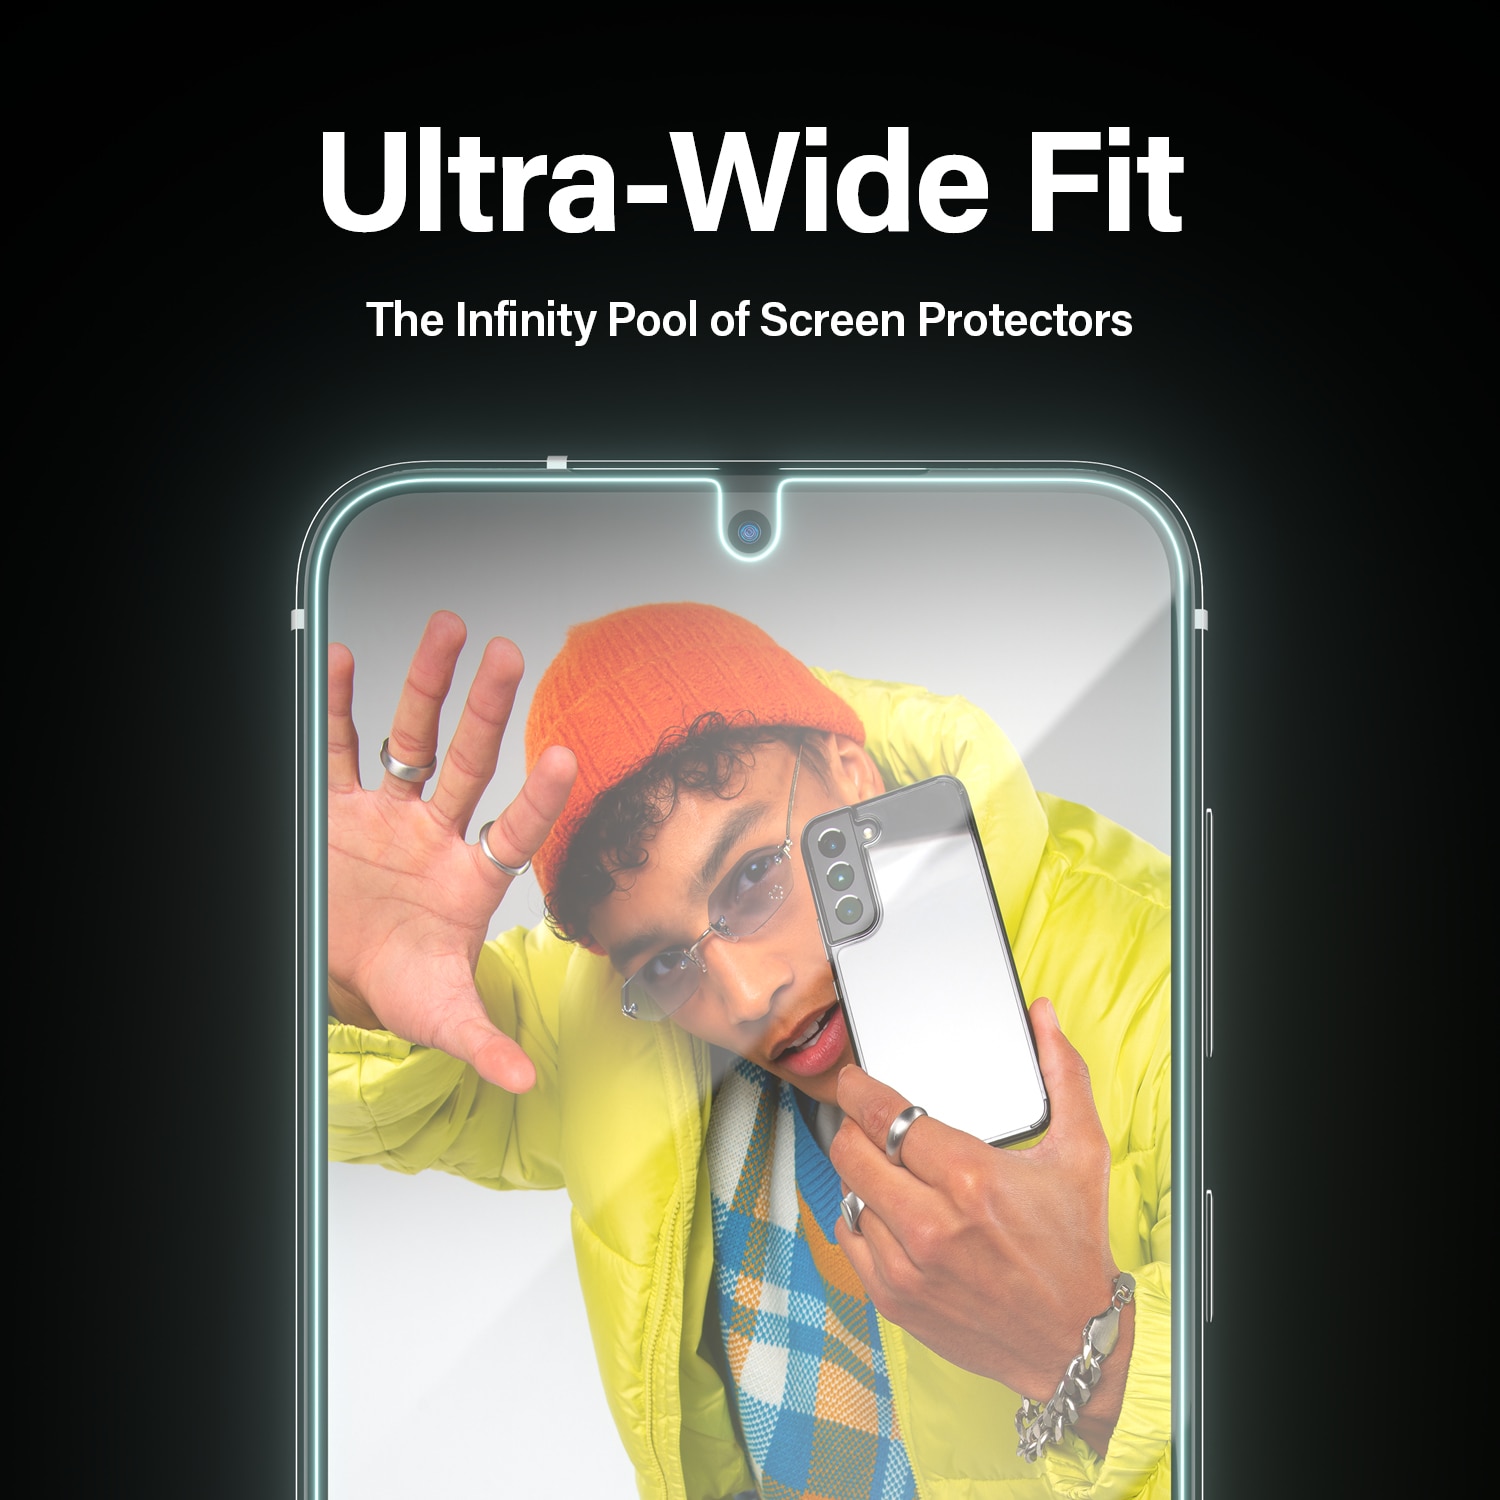 Samsung Galaxy S23 Plus Screen Protector (with EasyAligner) Ultra Wide Fit